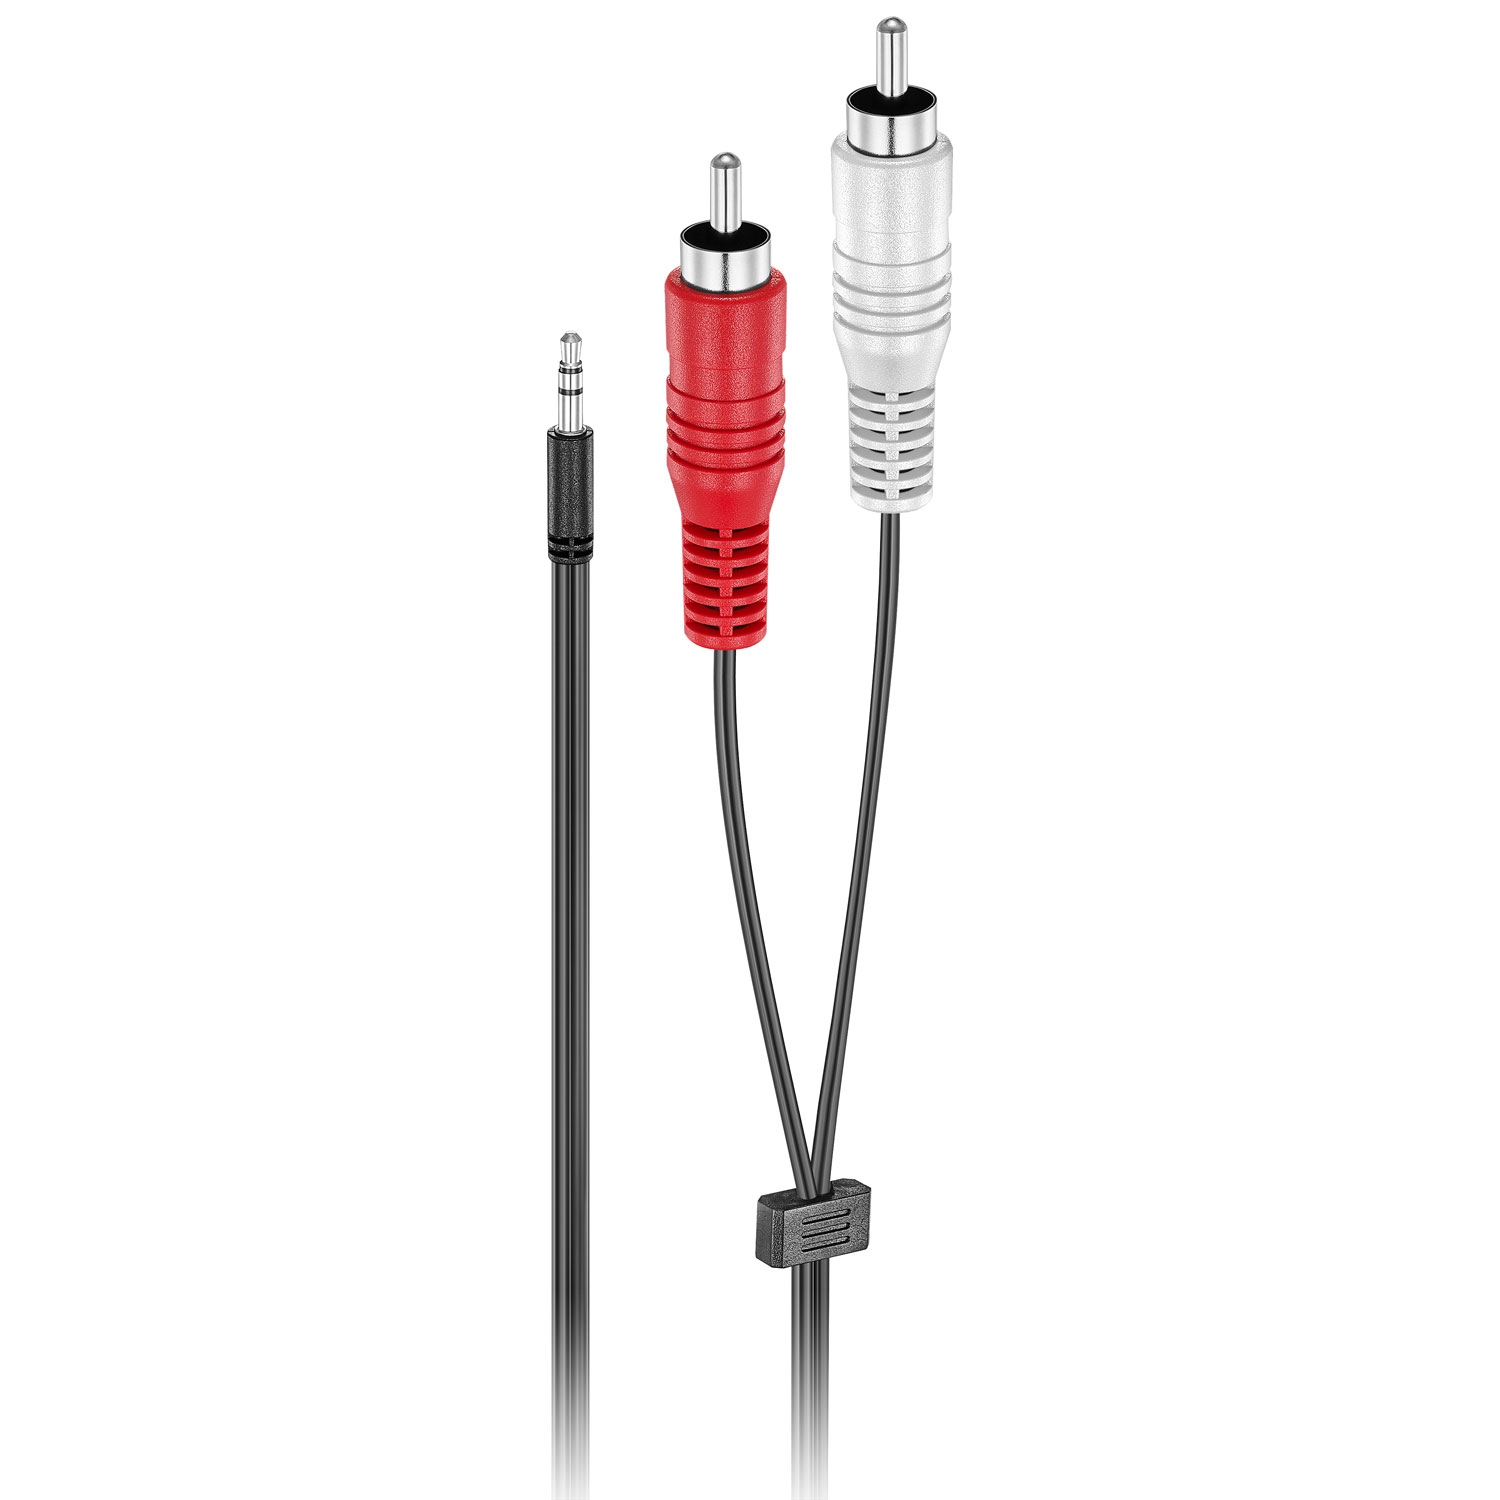 Insignia 1.8m (6 ft.) 3.5mm to RCA Audio Cable